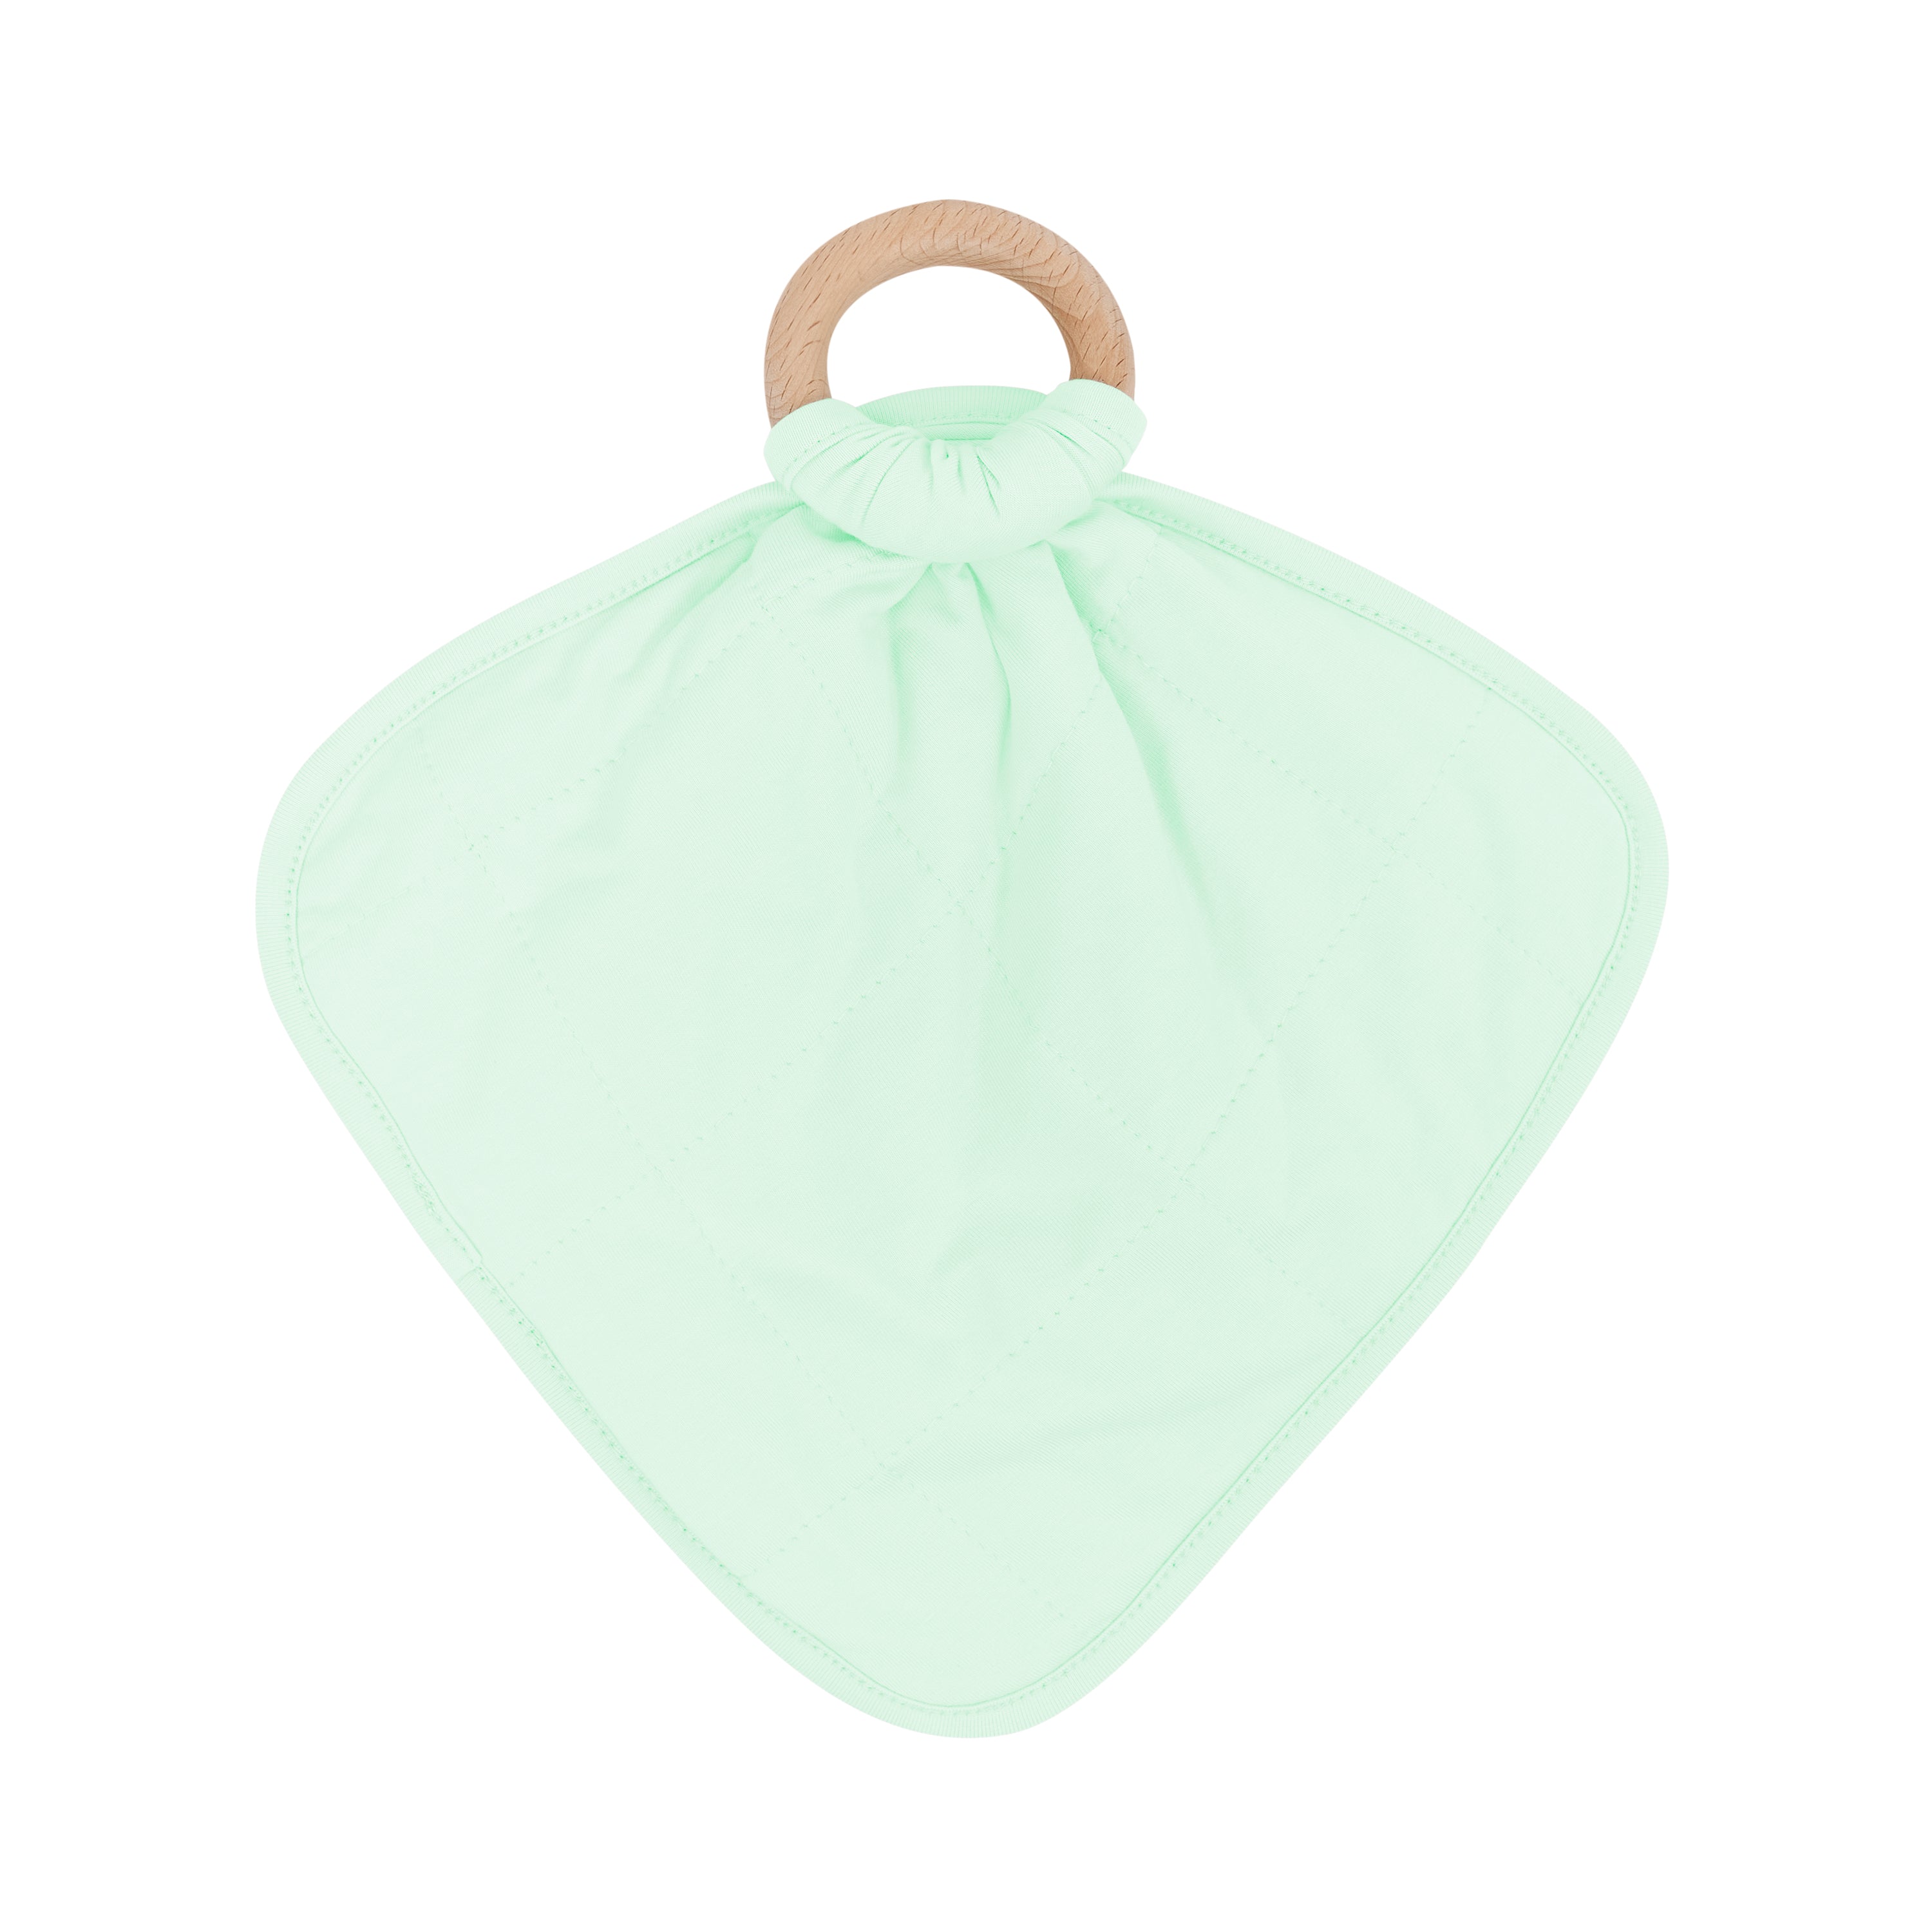 Kyte Baby Lovey Mint / Infant Lovey in Mint with Removable Teething Ring